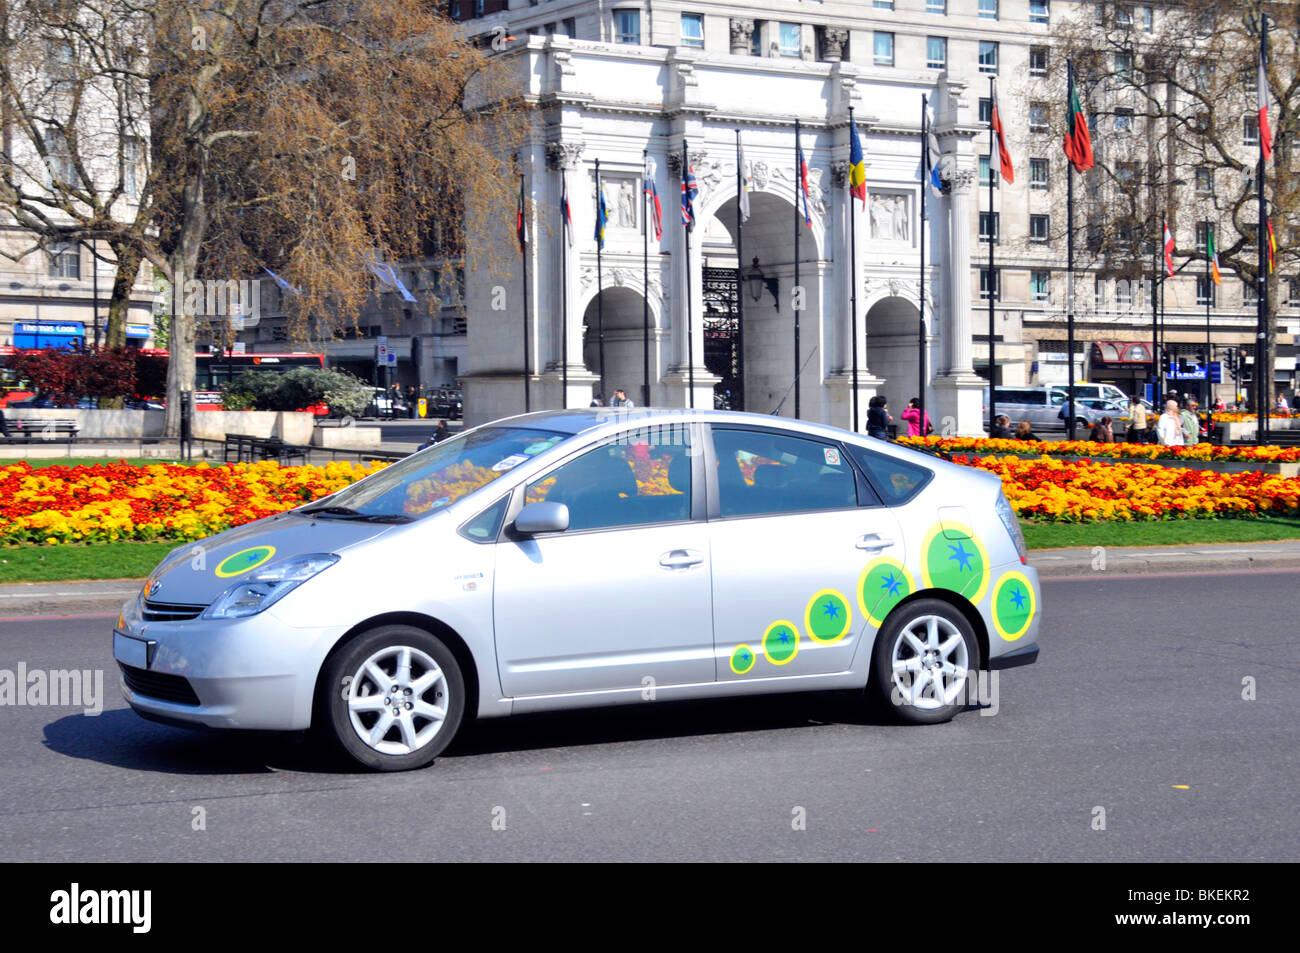 Toyota Prius a Hybrid car combining internal combustion engine with electric motor a five-door liftback passing Marble Arch in 2010 London England UK Stock Photo